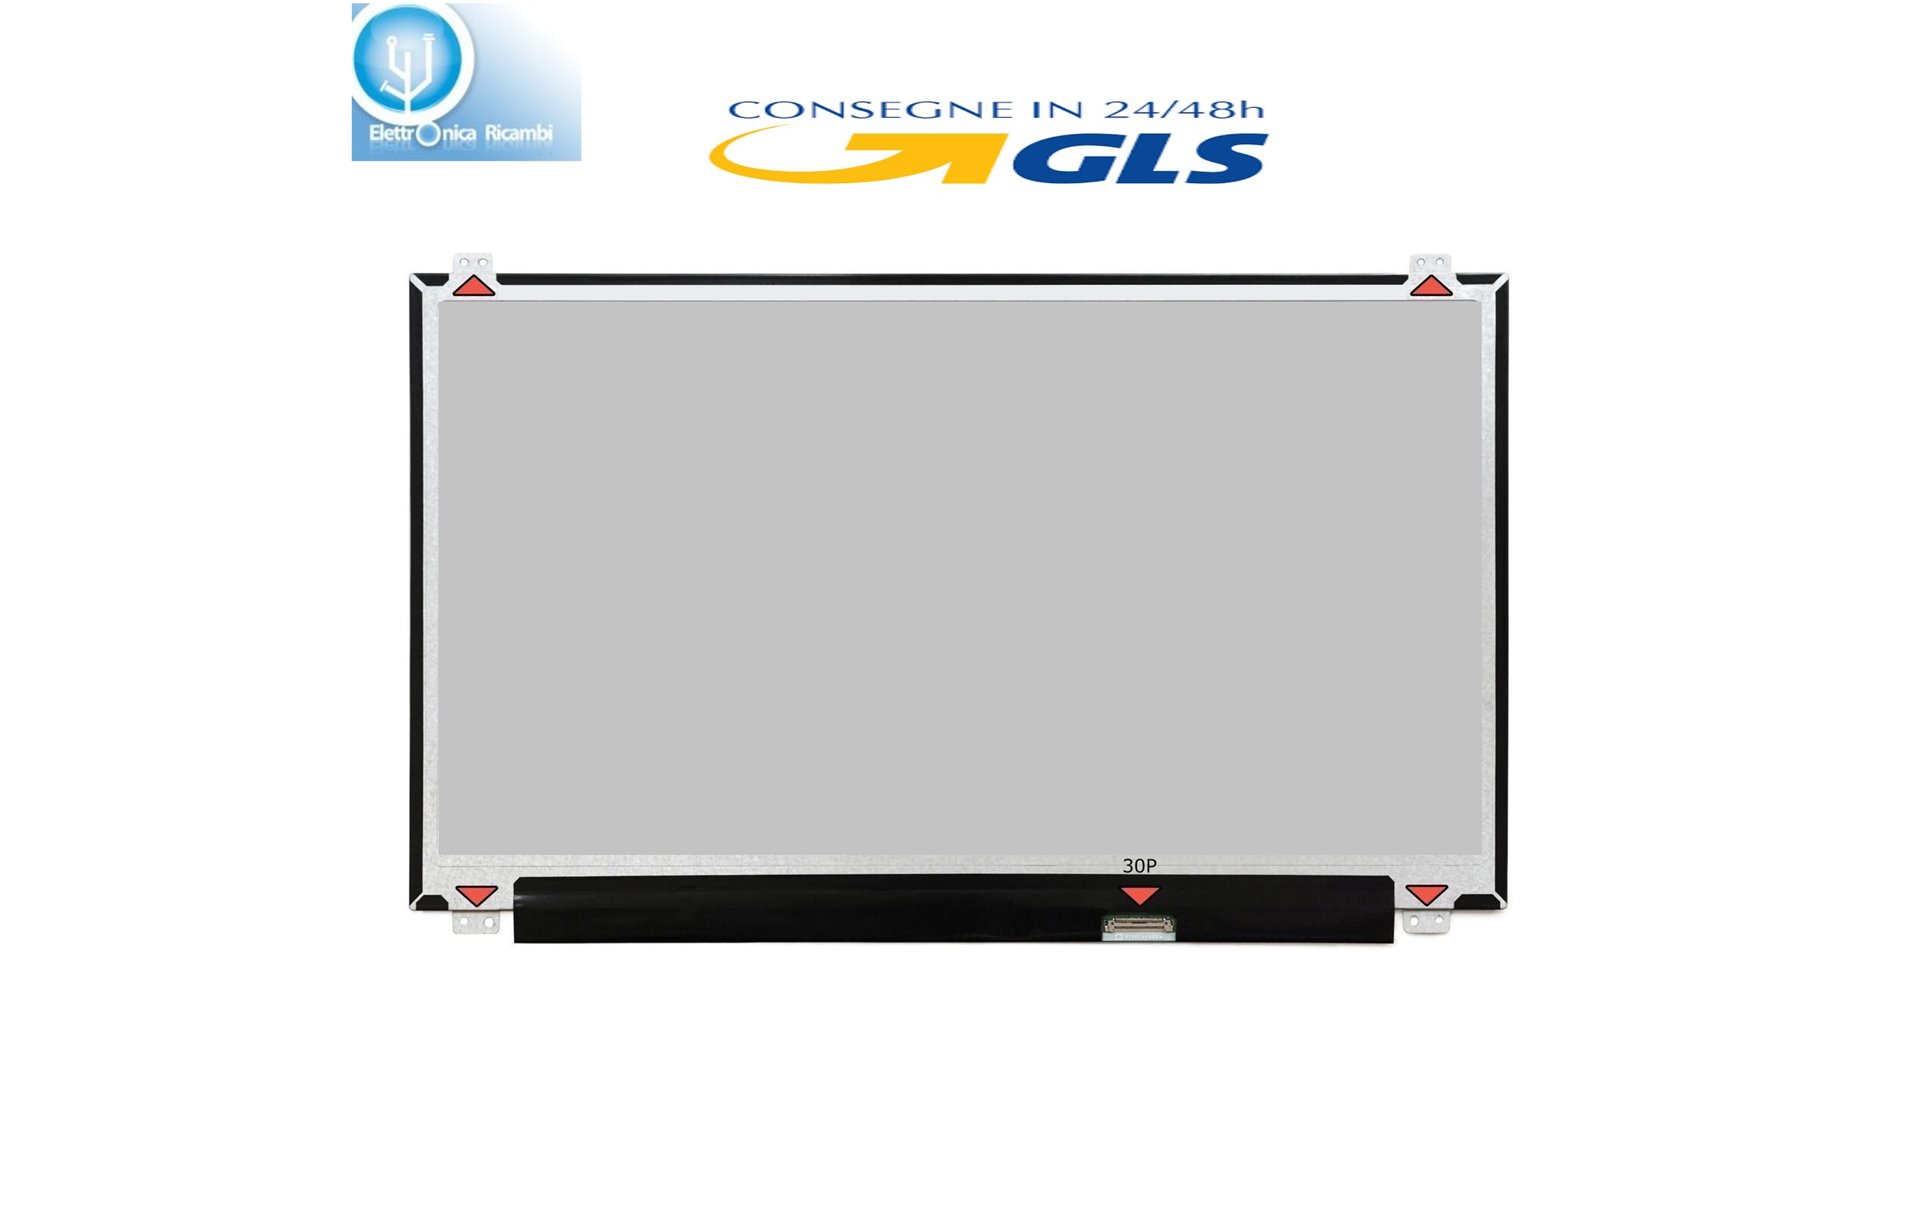 Display LCD Dell VOSTRO 15 3568 SERIES 15,6 LED 1366X768 30 PIN